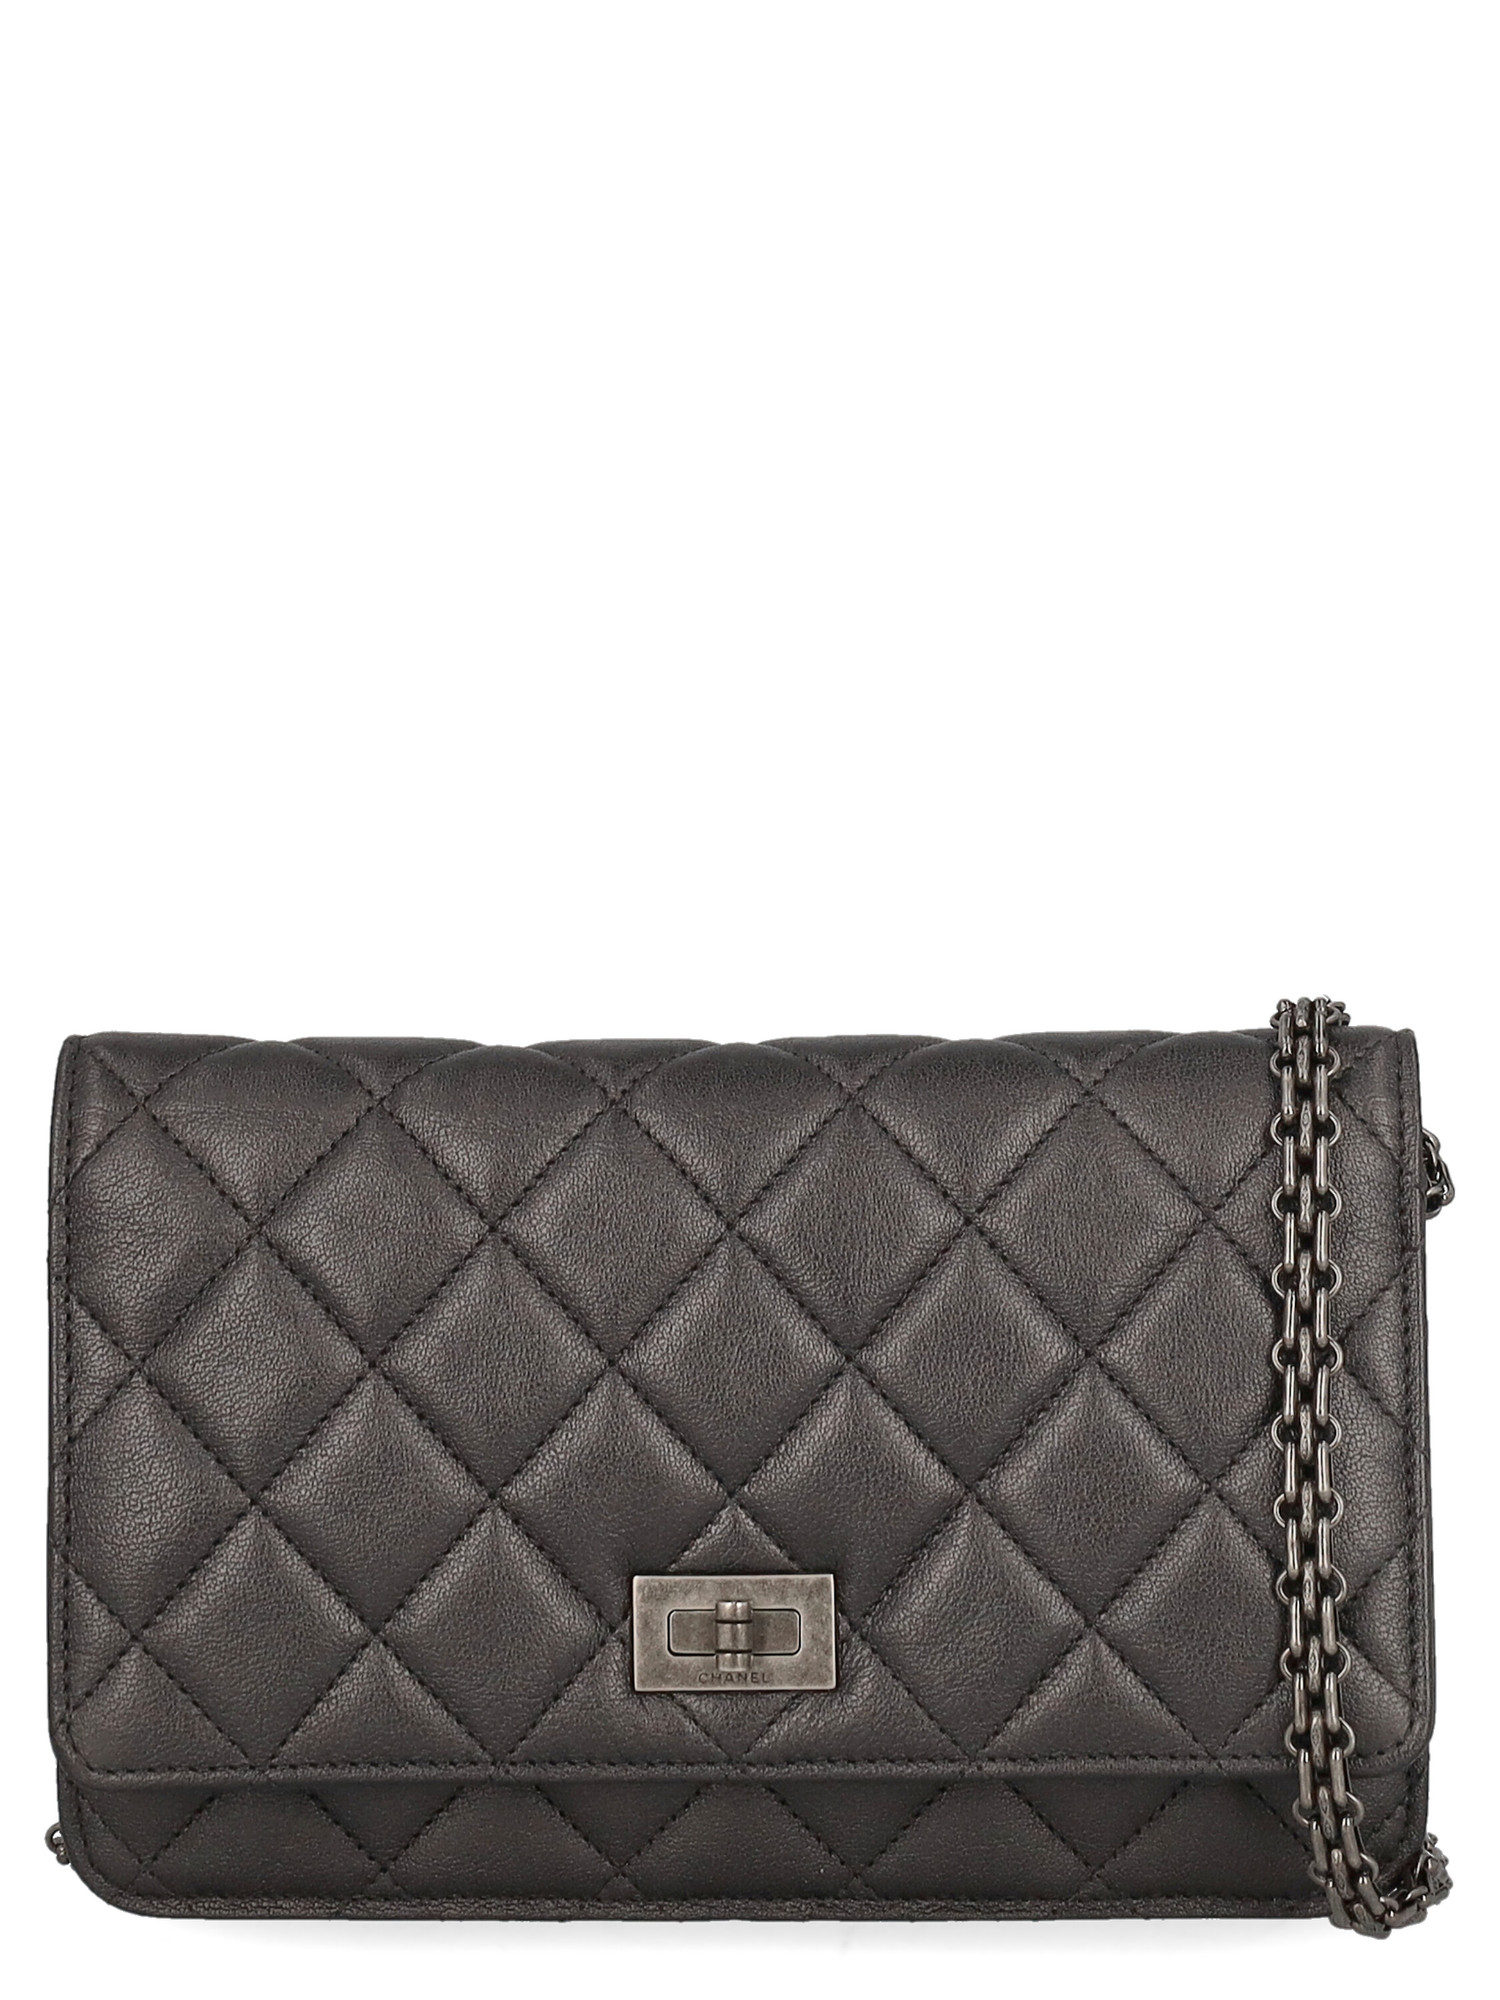 Condition: New With Tag, Solid Color Leather, Color: Anthracite -  -  -